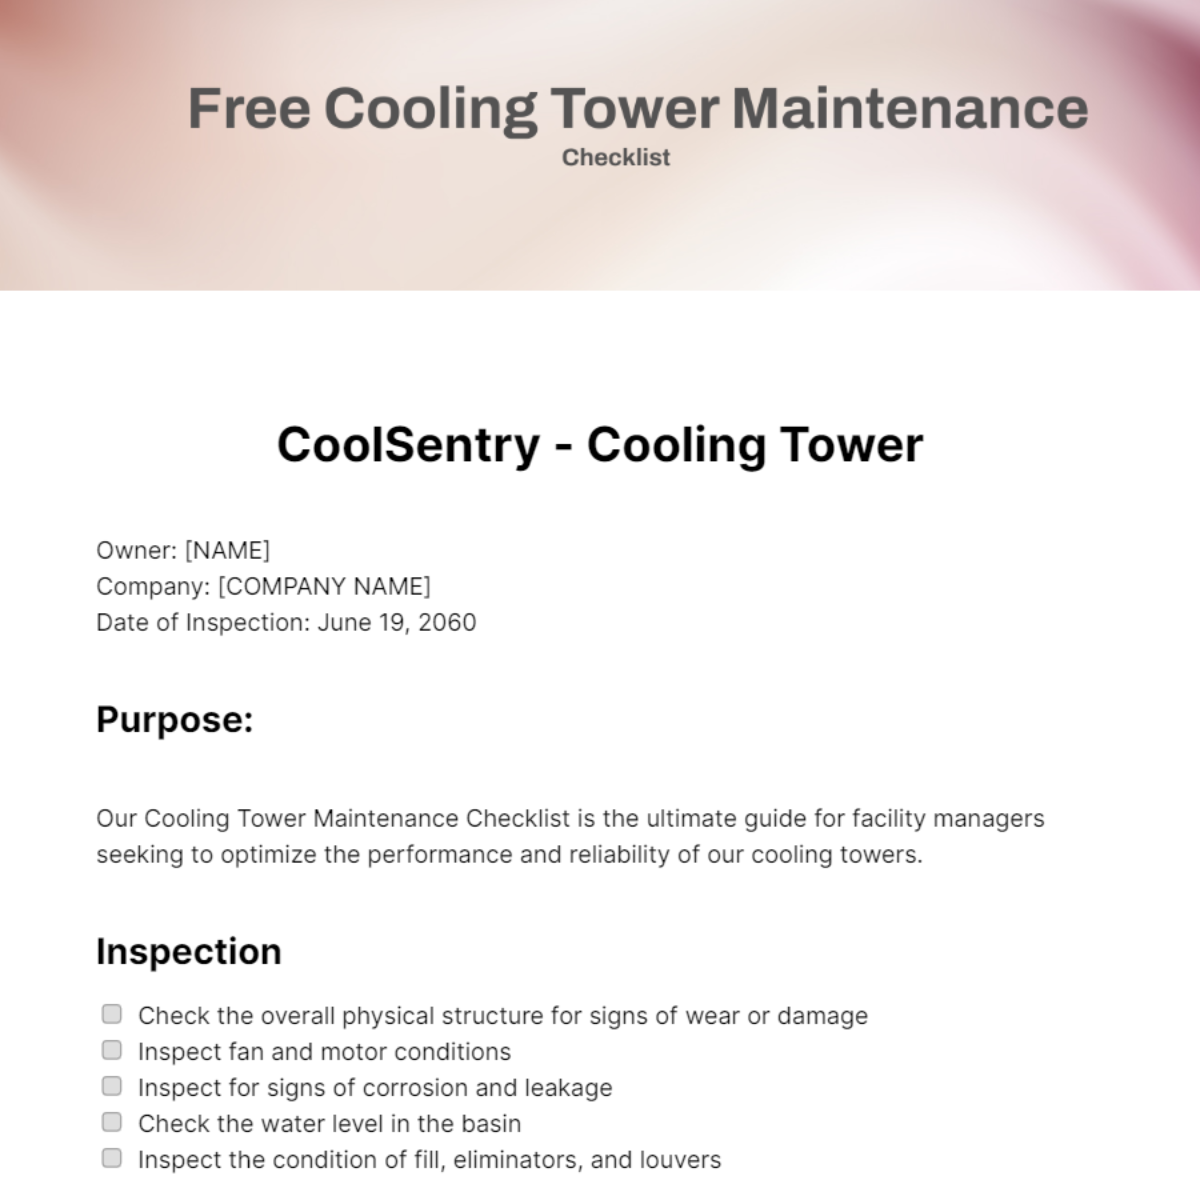 Free Cooling Tower Maintenance Checklist Template